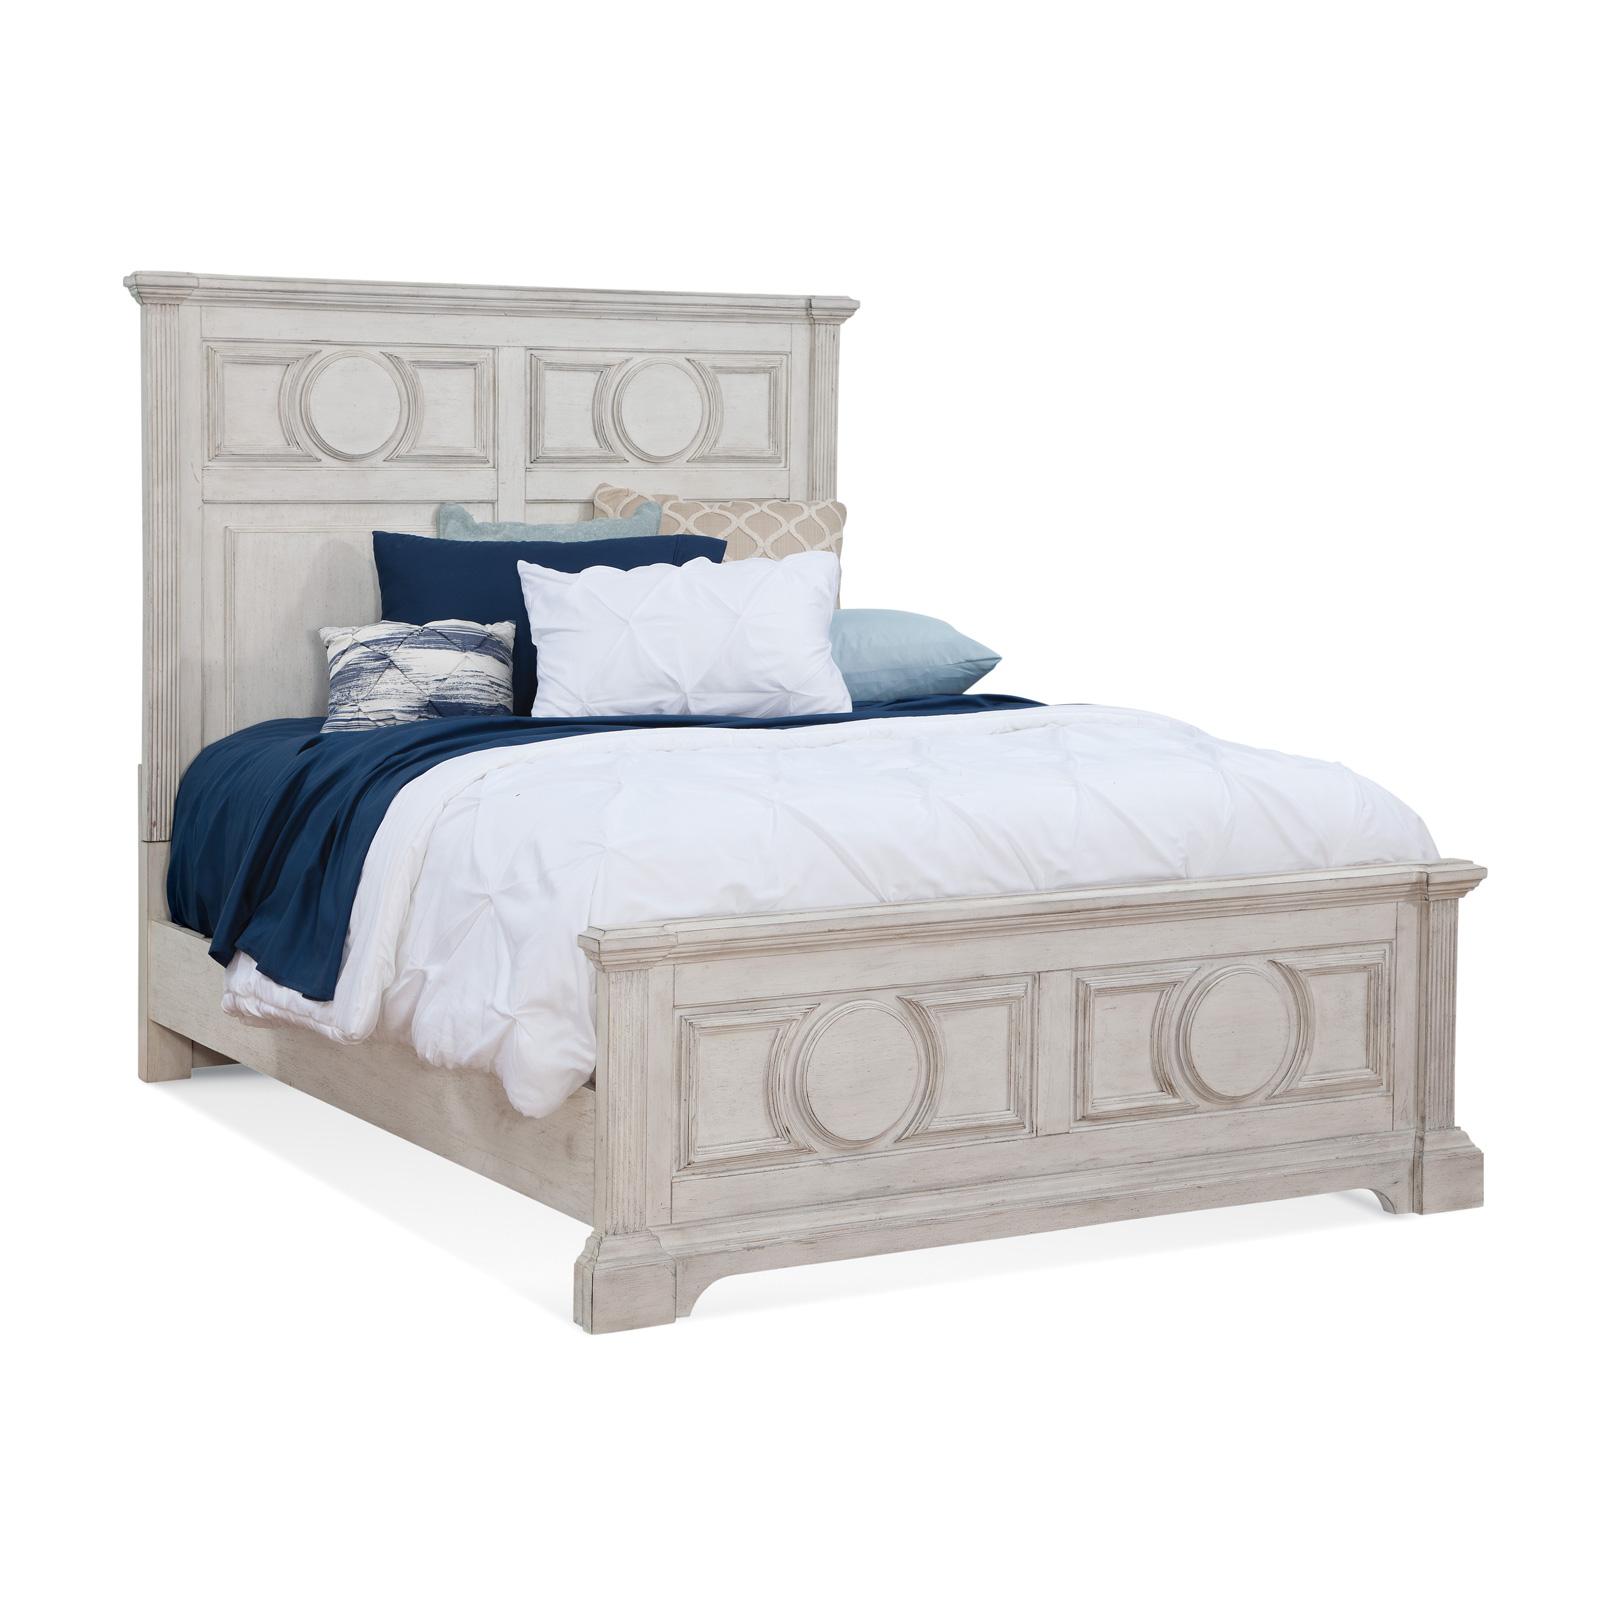 Cottage Panel Bed BRIGHTEN 9410-66PAN in Antique White 